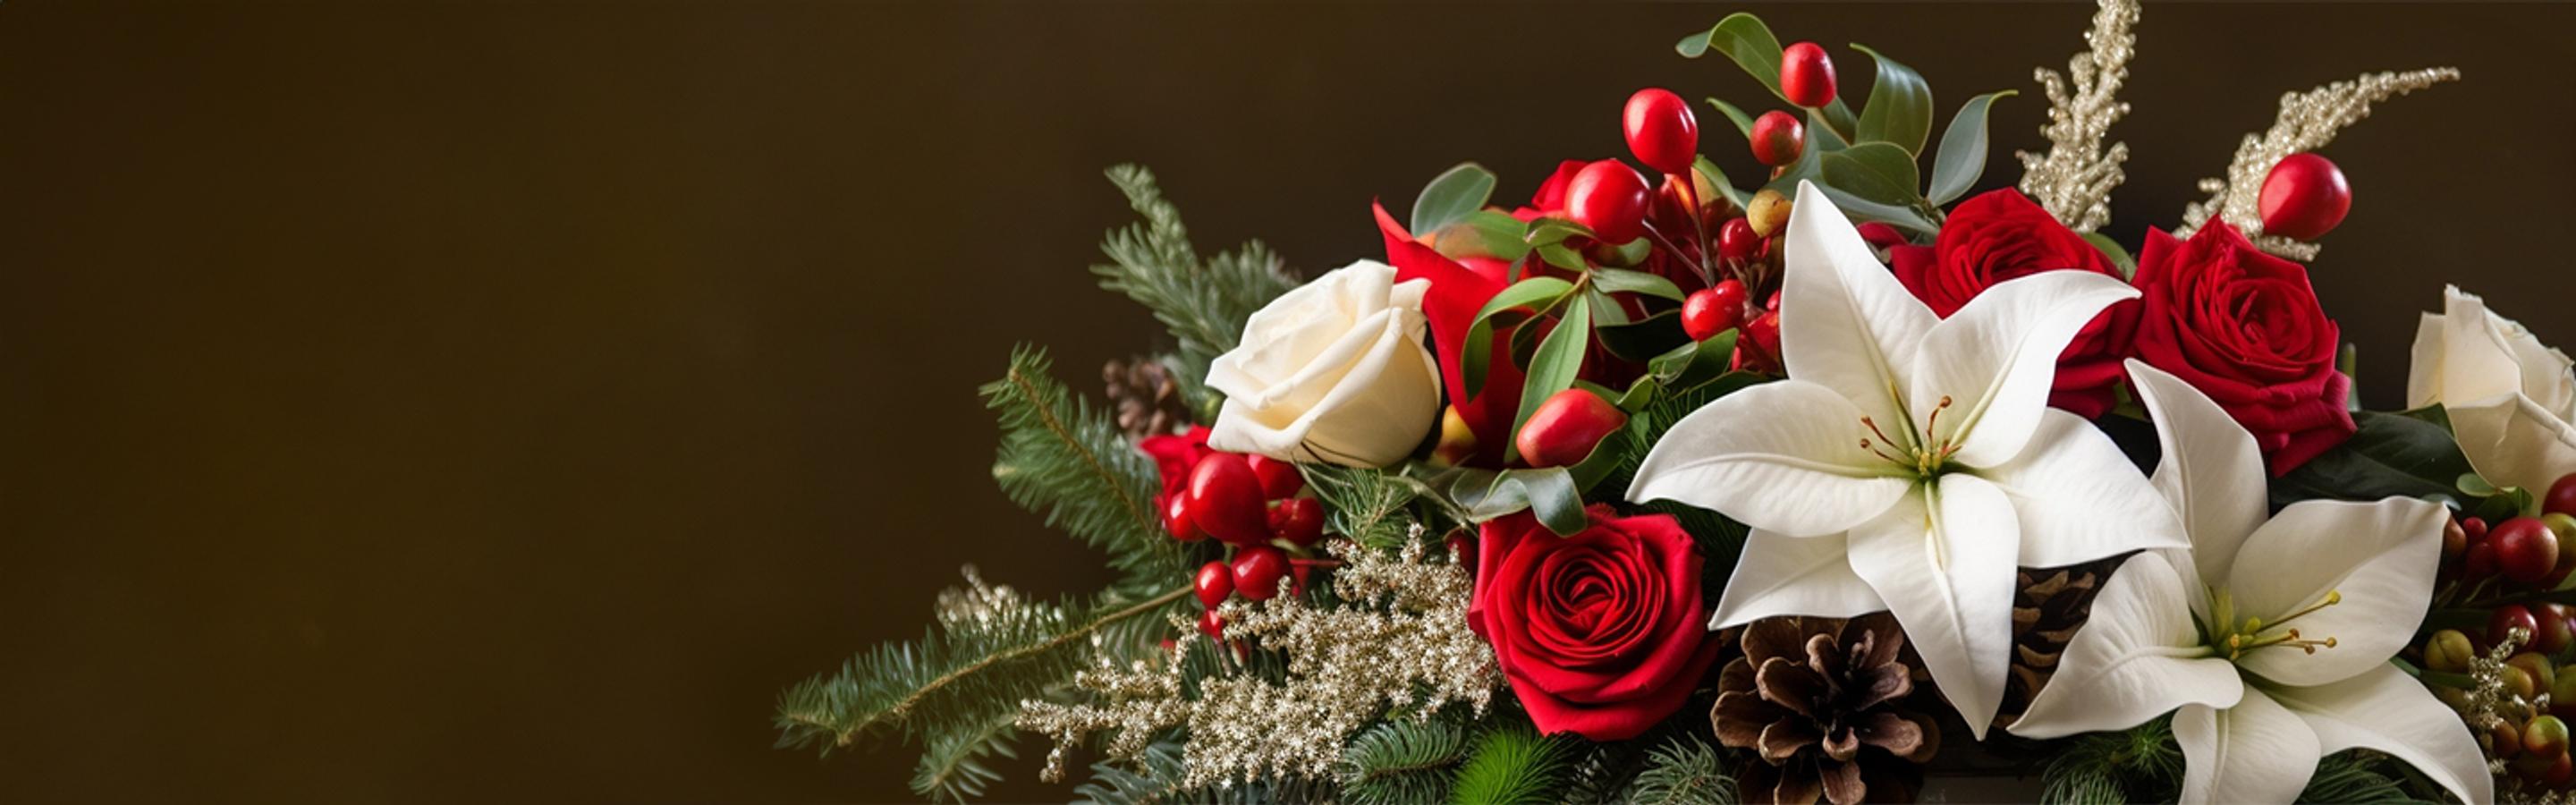 Christmas-themed holiday flower arrangement against a dark background. Flowers featuring red roses, white roses, holly, pine cones and beautiful greenery.